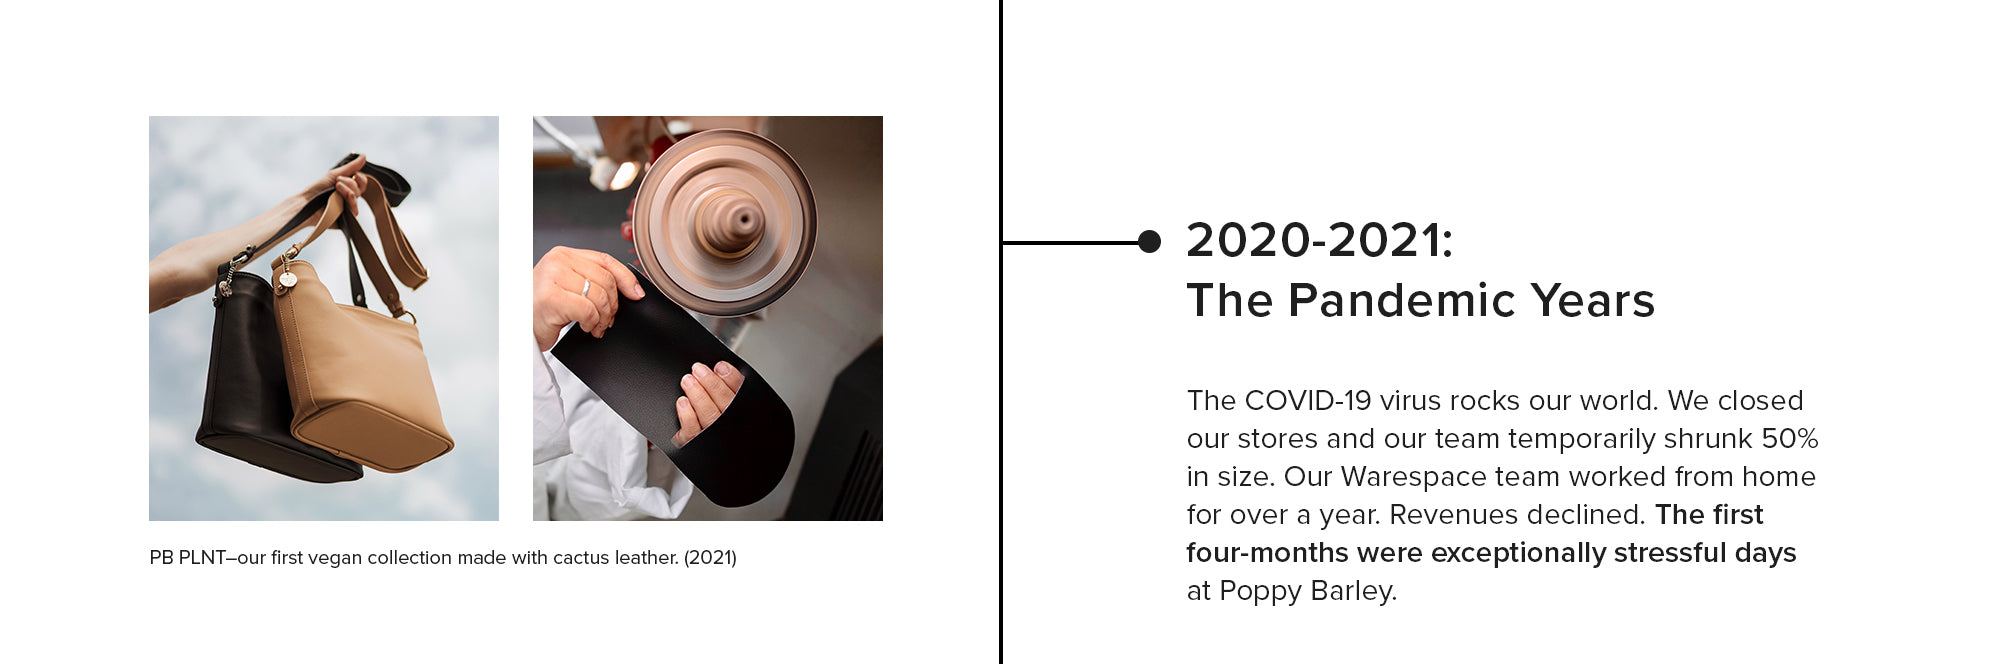 2020-2021: The Pandemic Years PB PLNT-our first vegan collection made with cactus leather. (2021) The COVID-19 virus rocks our world. We closed our stores and our team temporarily shrunk 50% in size. Our Warespace team worked from home for over a year. Revenues declined. The first four-months were exceptionally stressful days at Poppy Barley.